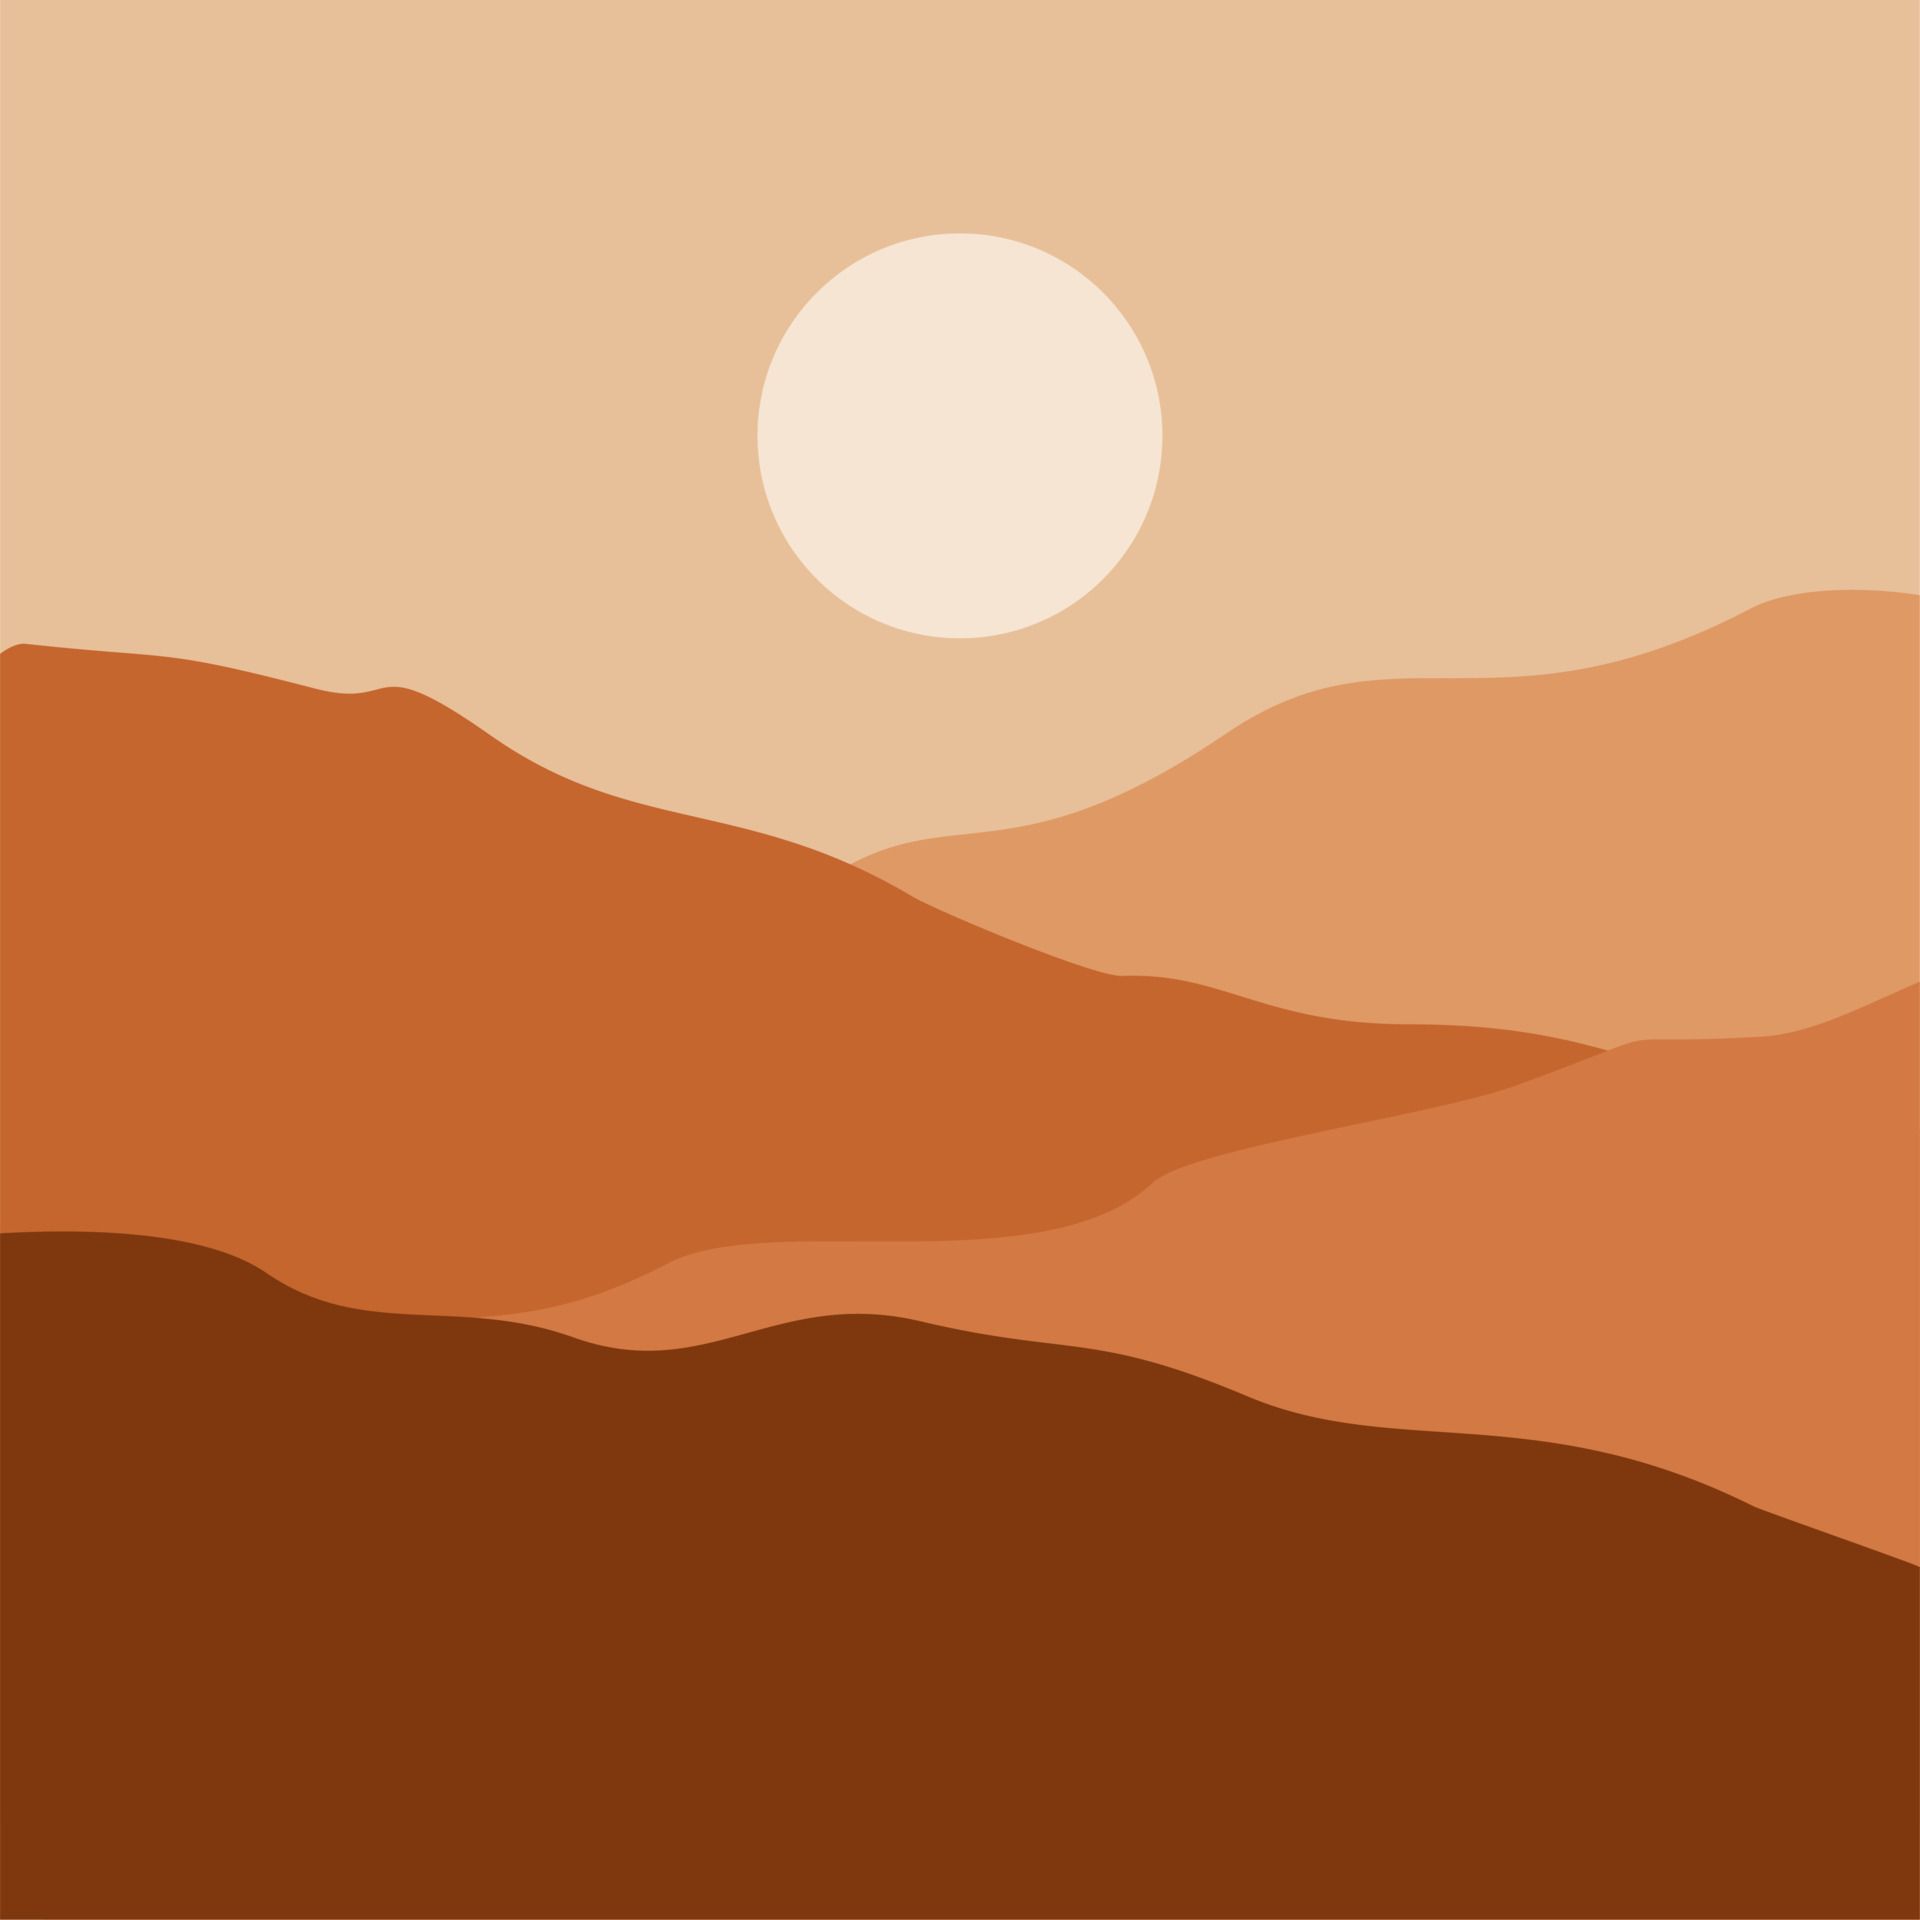 A sunset scene with mountains and hills - Terracotta, desert